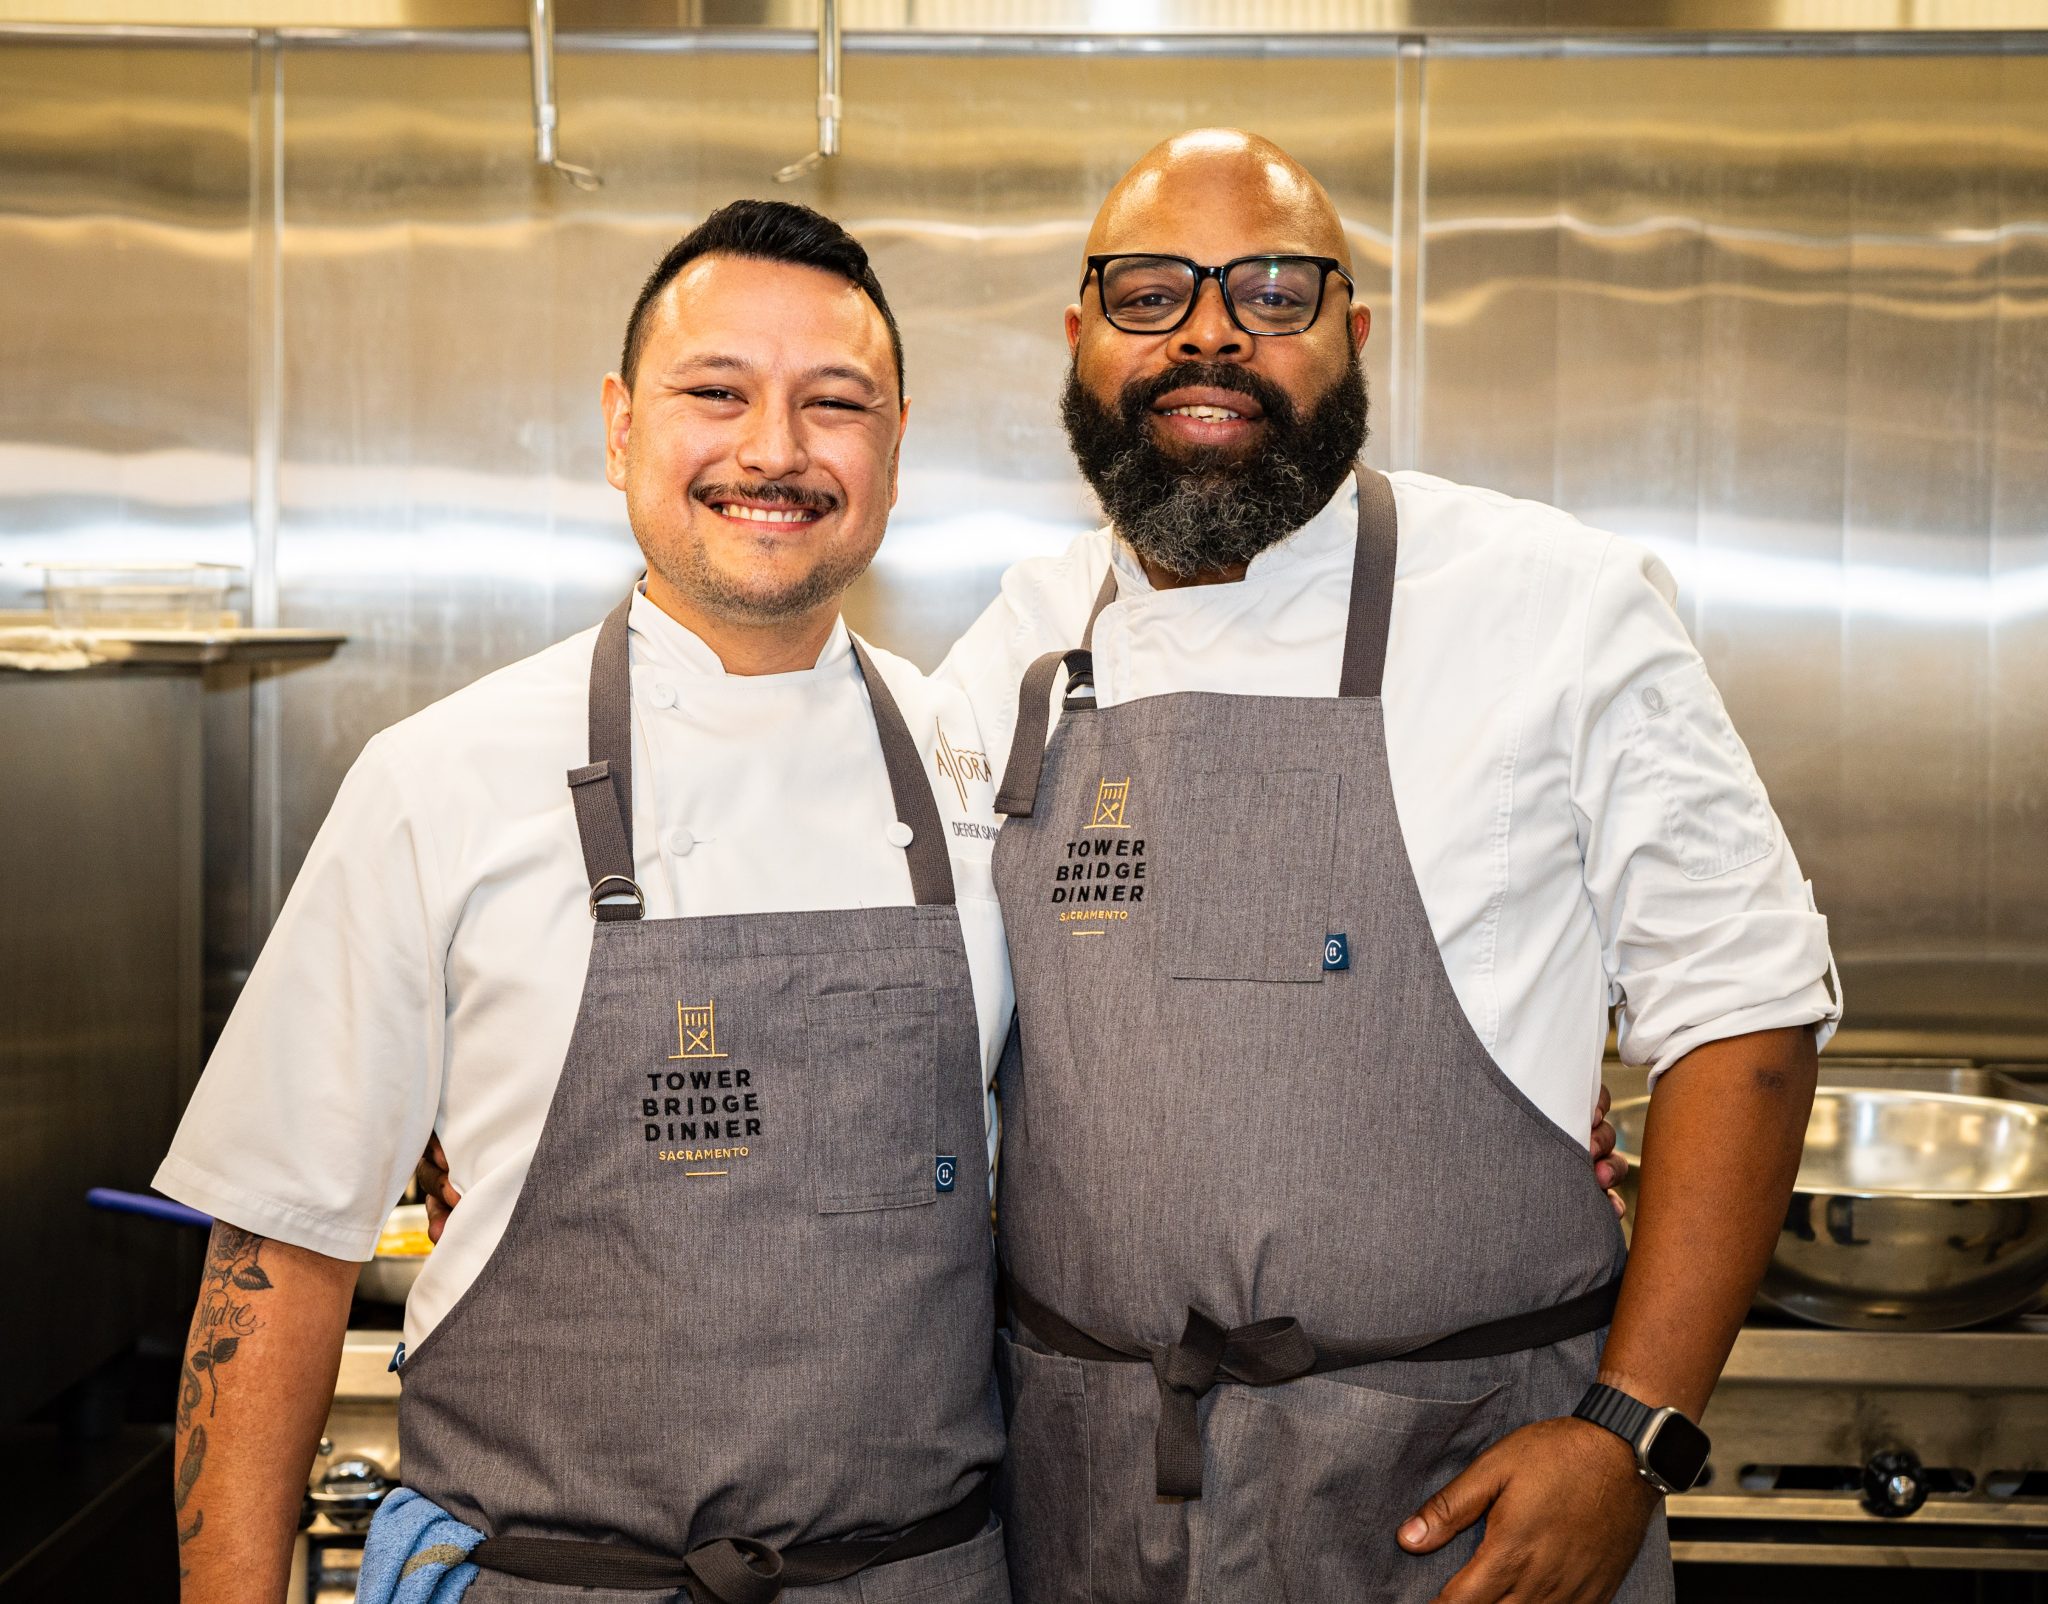 Derek Sawyer, Dennis Sydnor, renegade dining, allora, two men, african american, hispanic, Farm to fork festival, sacramento, california, gourmet food, chefs, men and woman, people of color, uniforms, friends, fun, happy, cooks, preview dinner